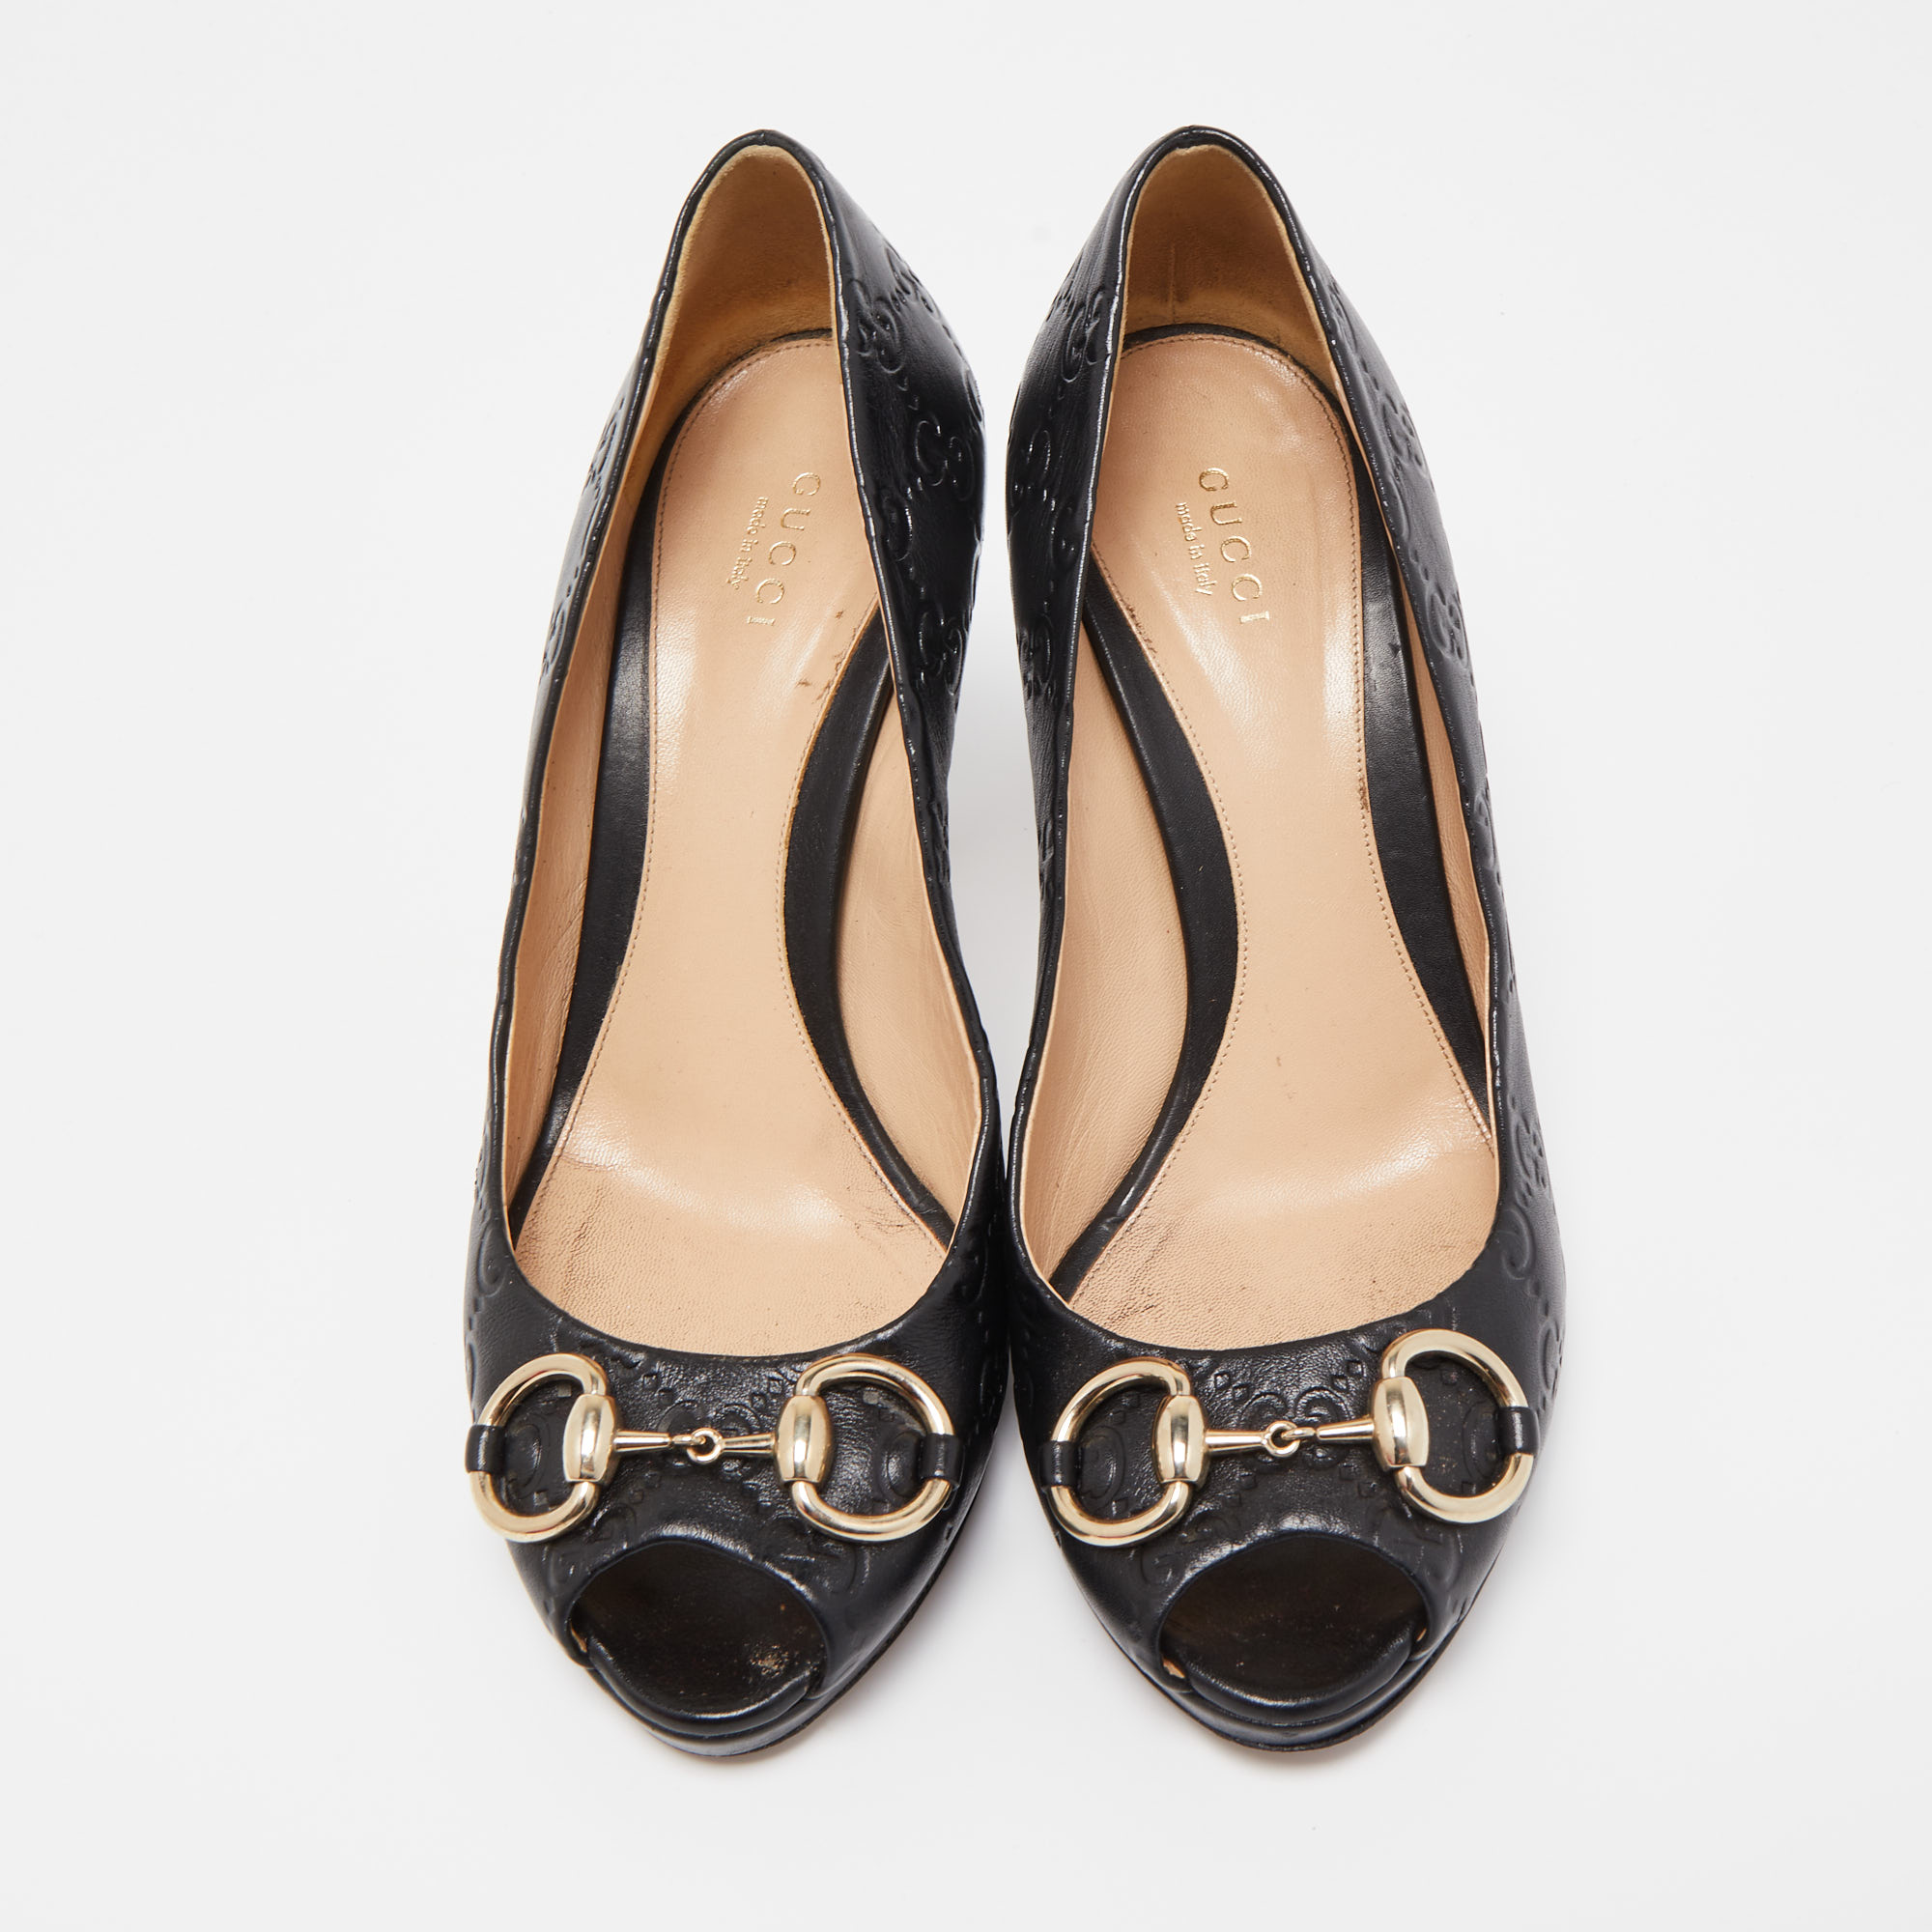 Gucci Black Guccissima Leather New Hollywood Pumps Size 38.5